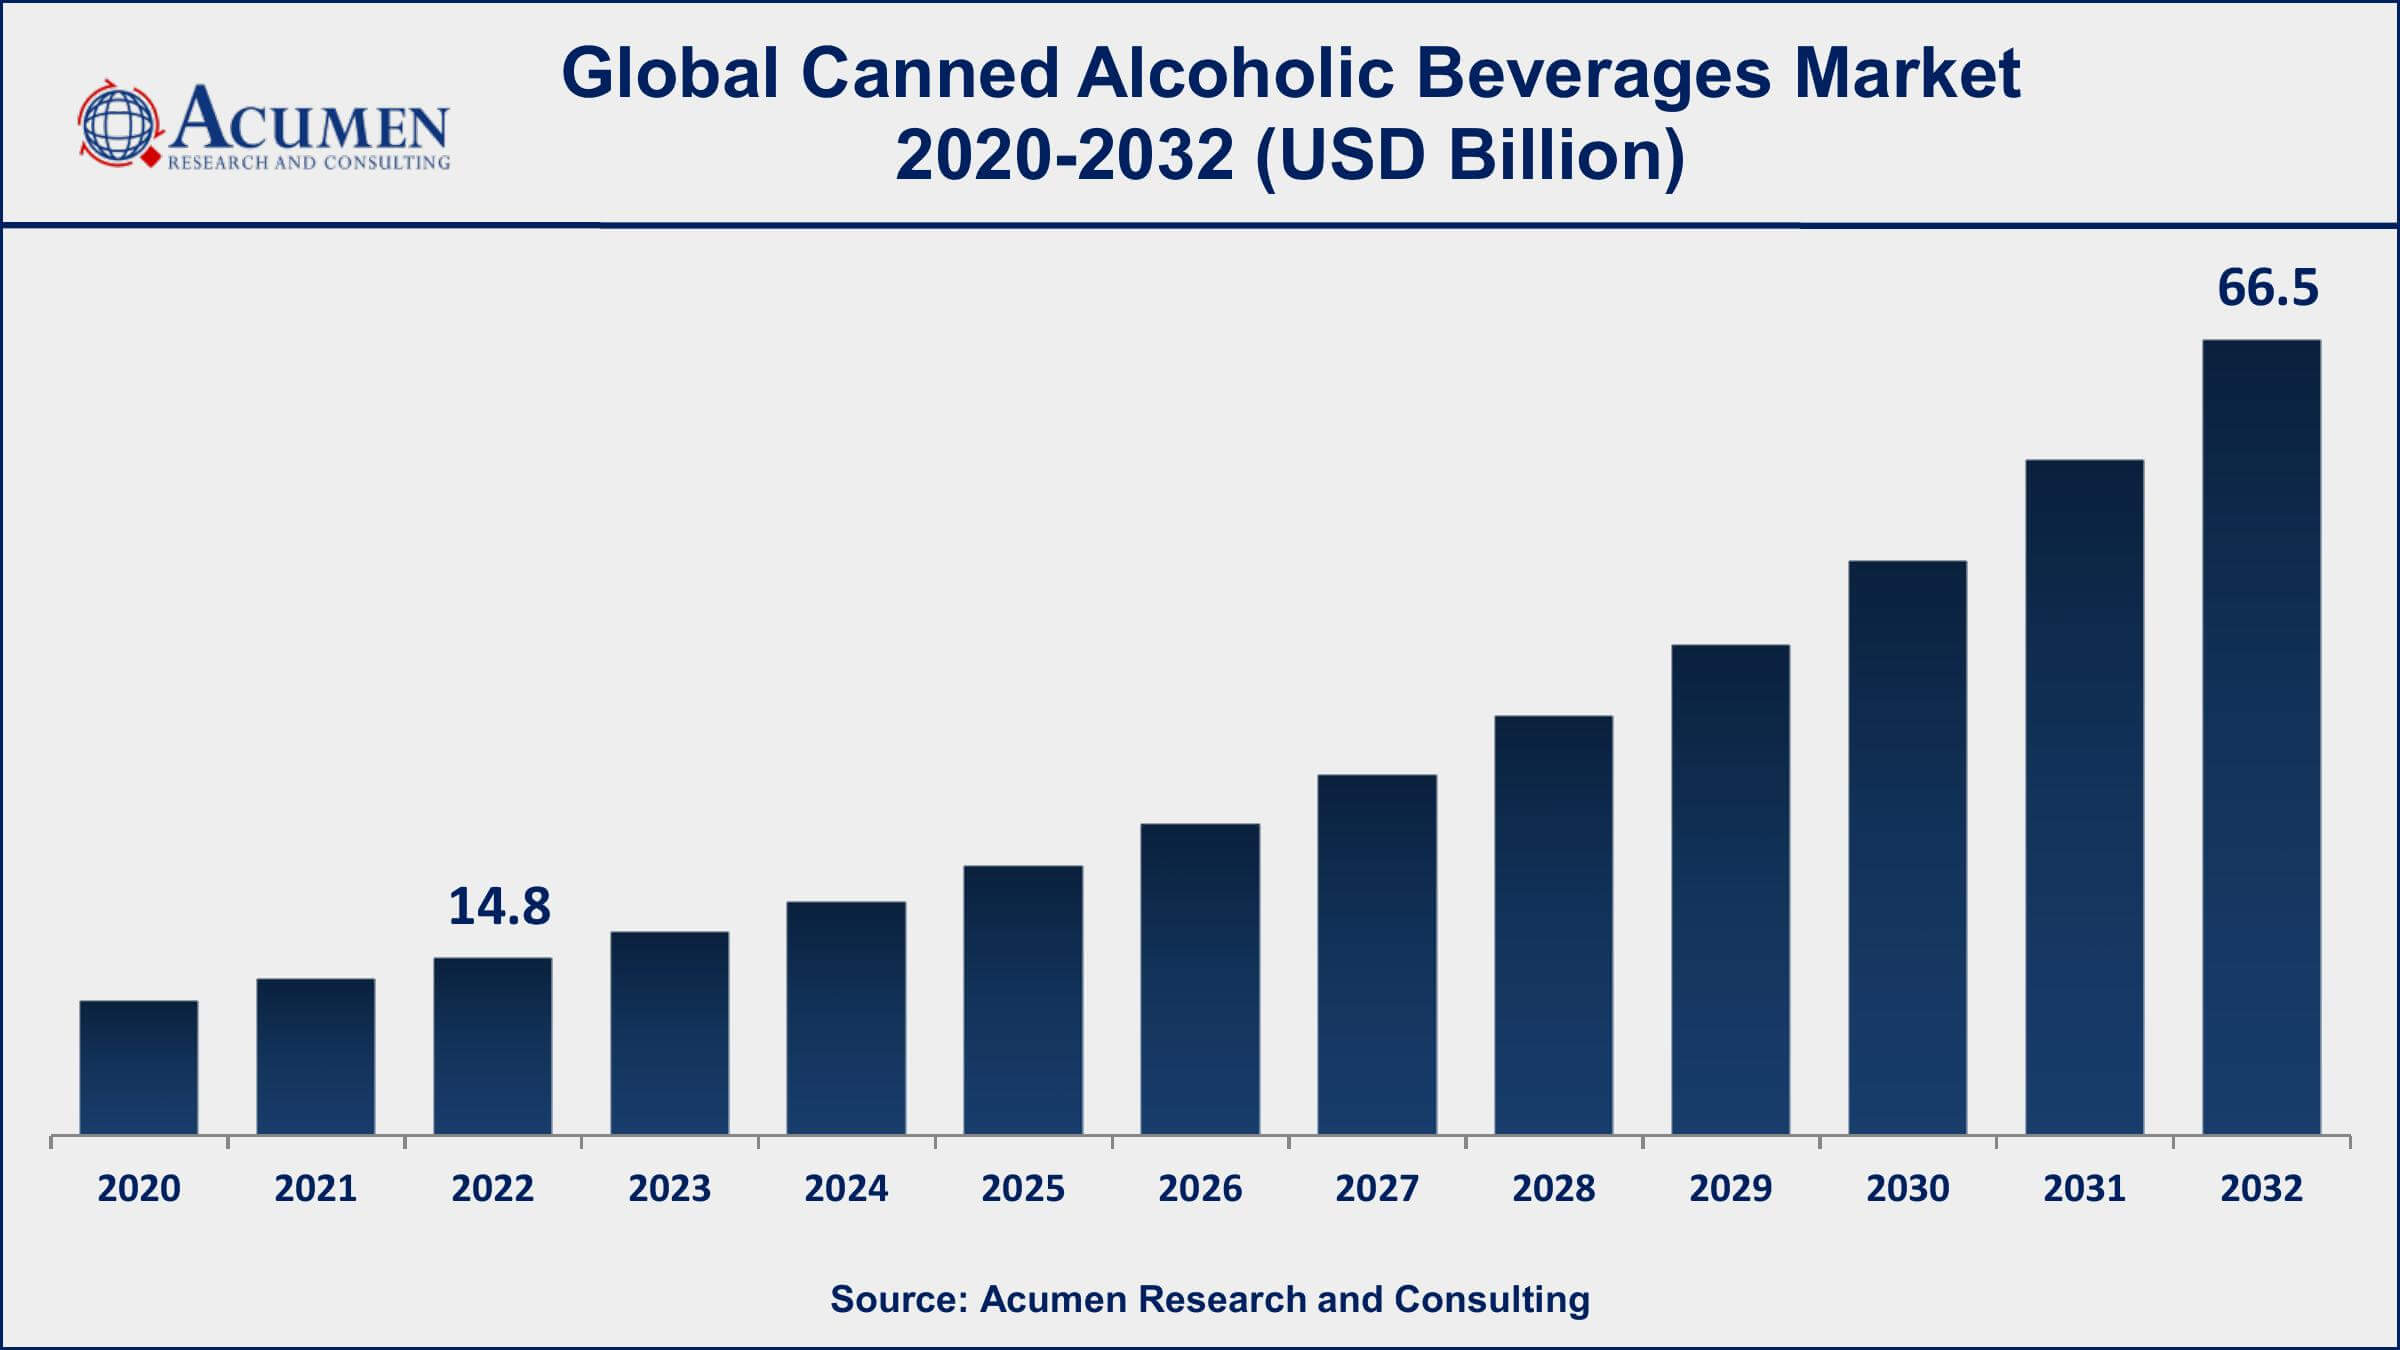 Canned Alcoholic Beverages Market Drivers